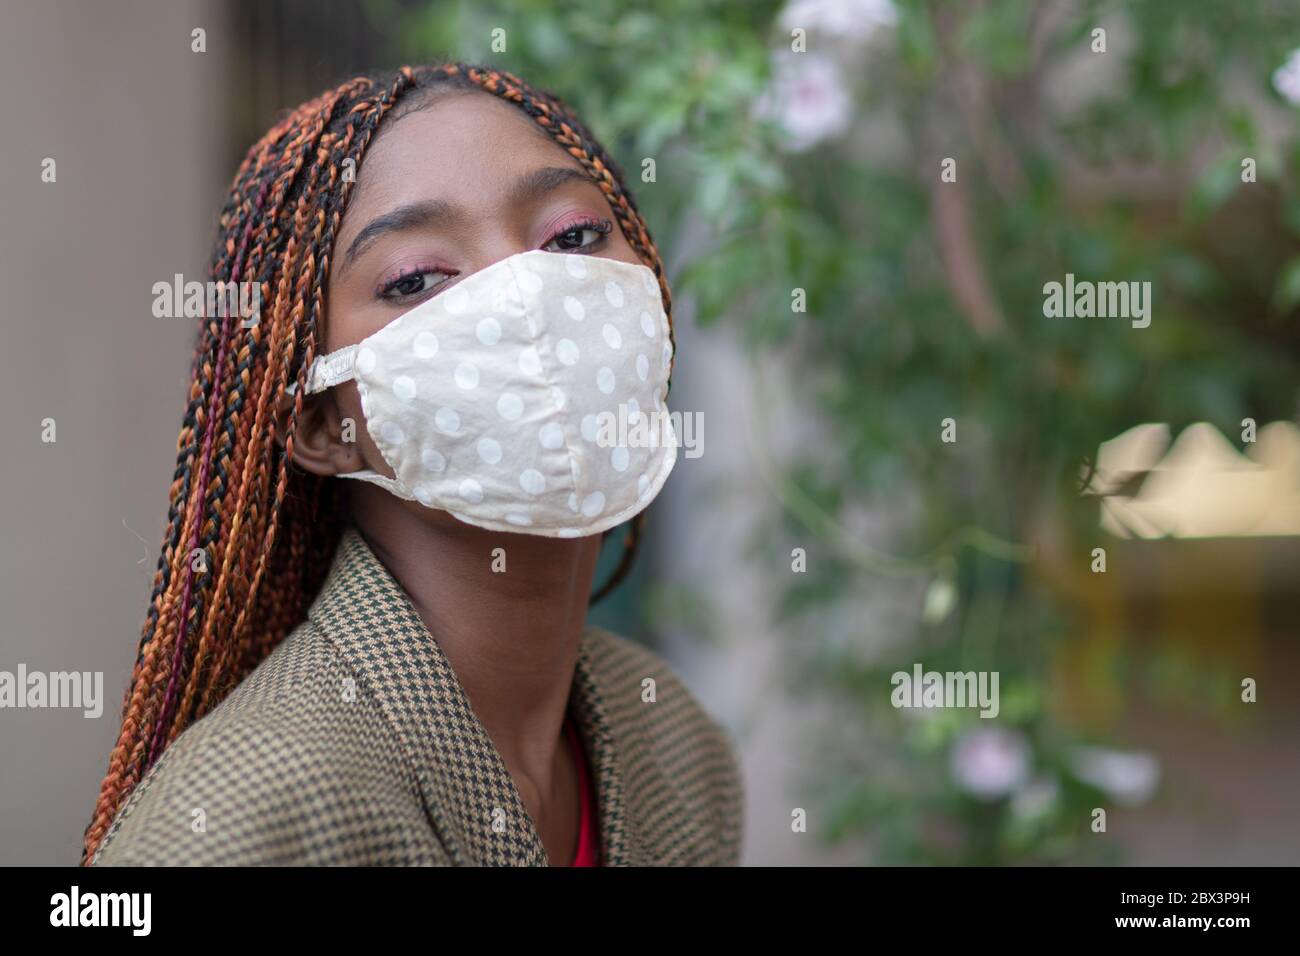 Young dark-skinned girl wearing protective fabric face mask in coronavirus pandemic, COVID-19. Stock Photo